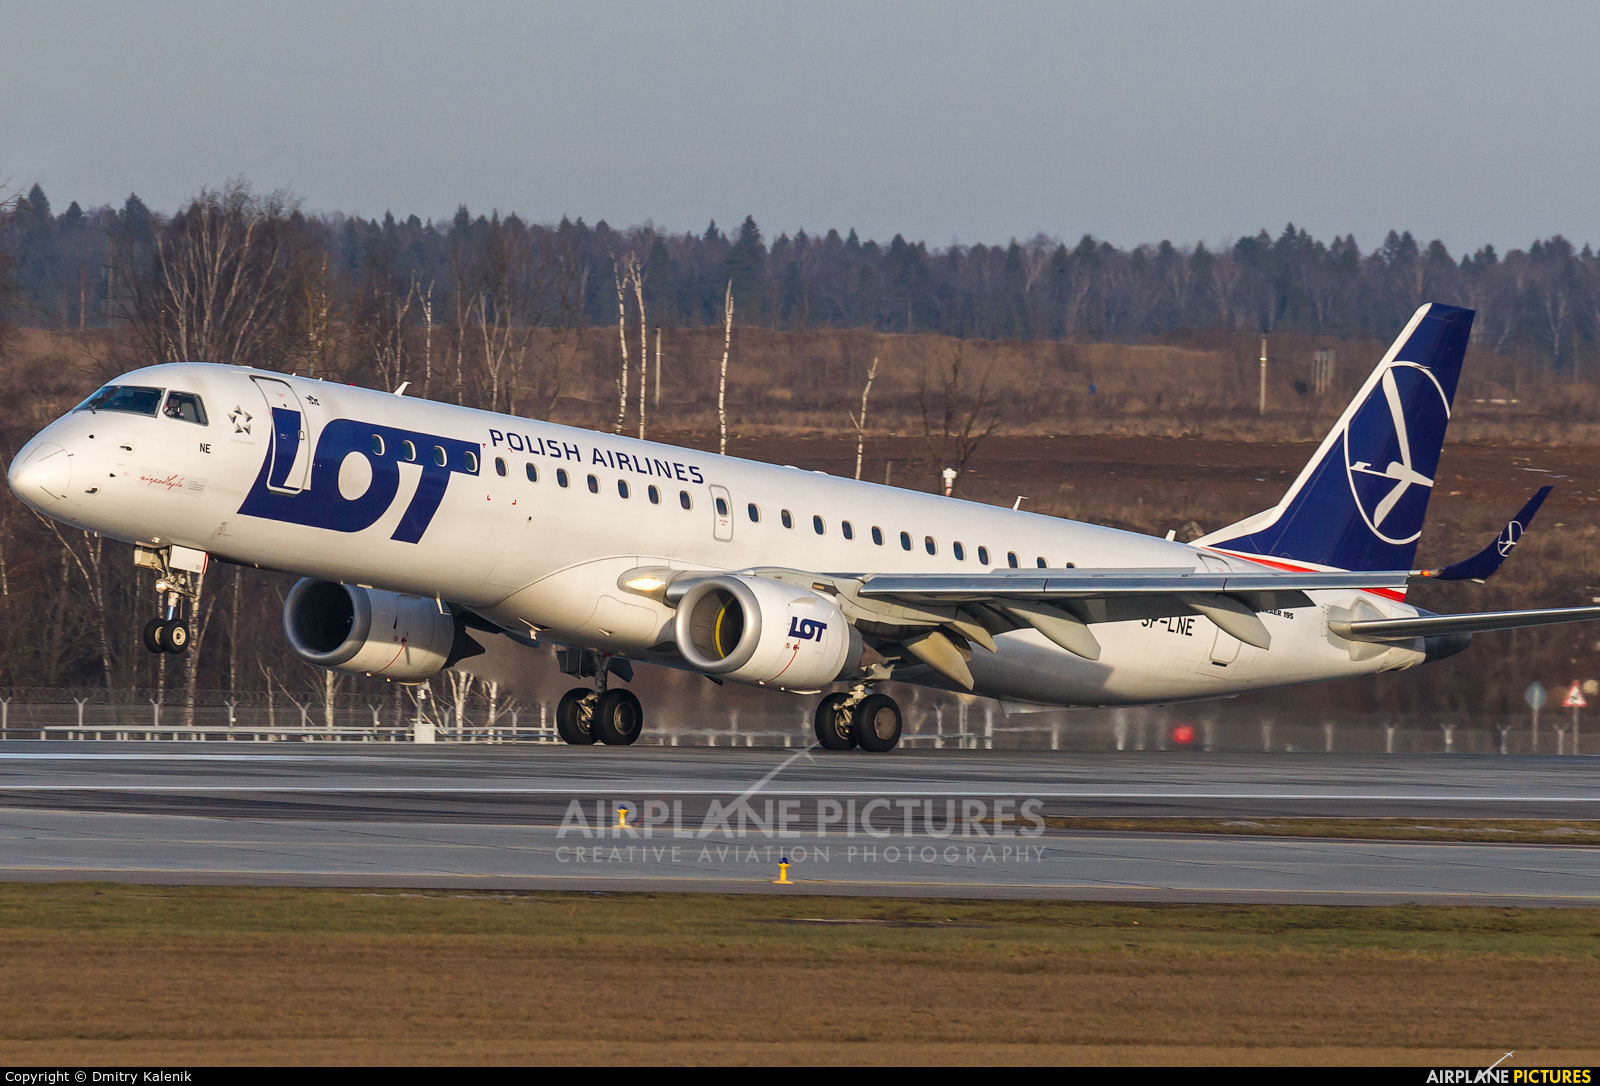 LOT - Polish Airlines SP-LNE aircraft at Moscow - Sheremetyevo